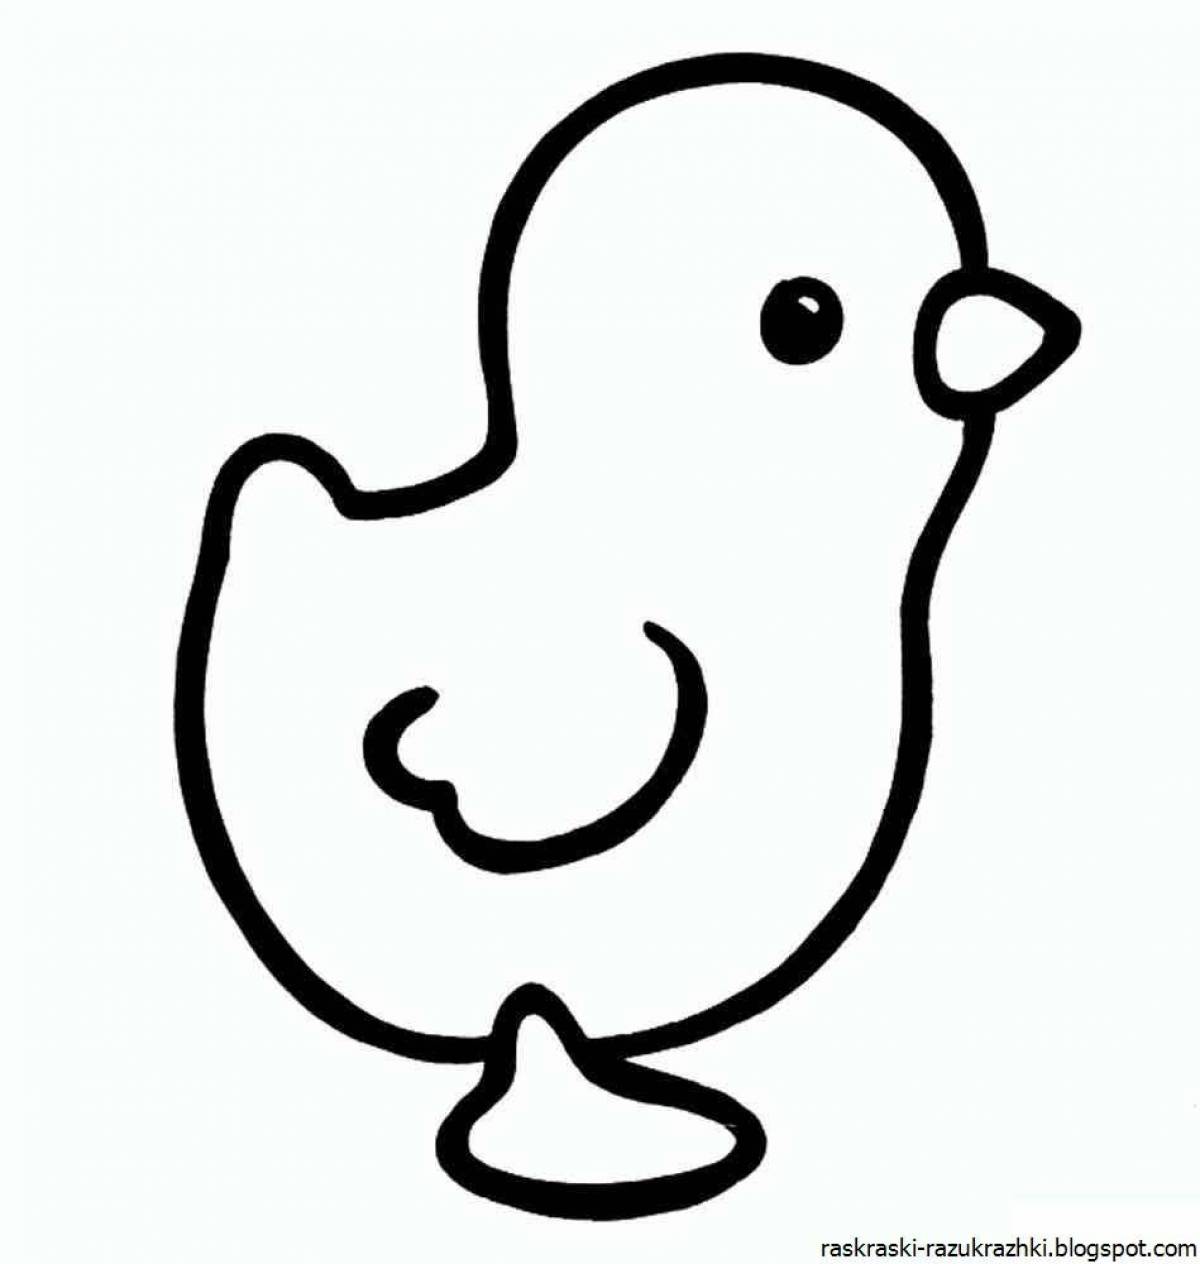 Coloring page cute chick for 2-3 year olds